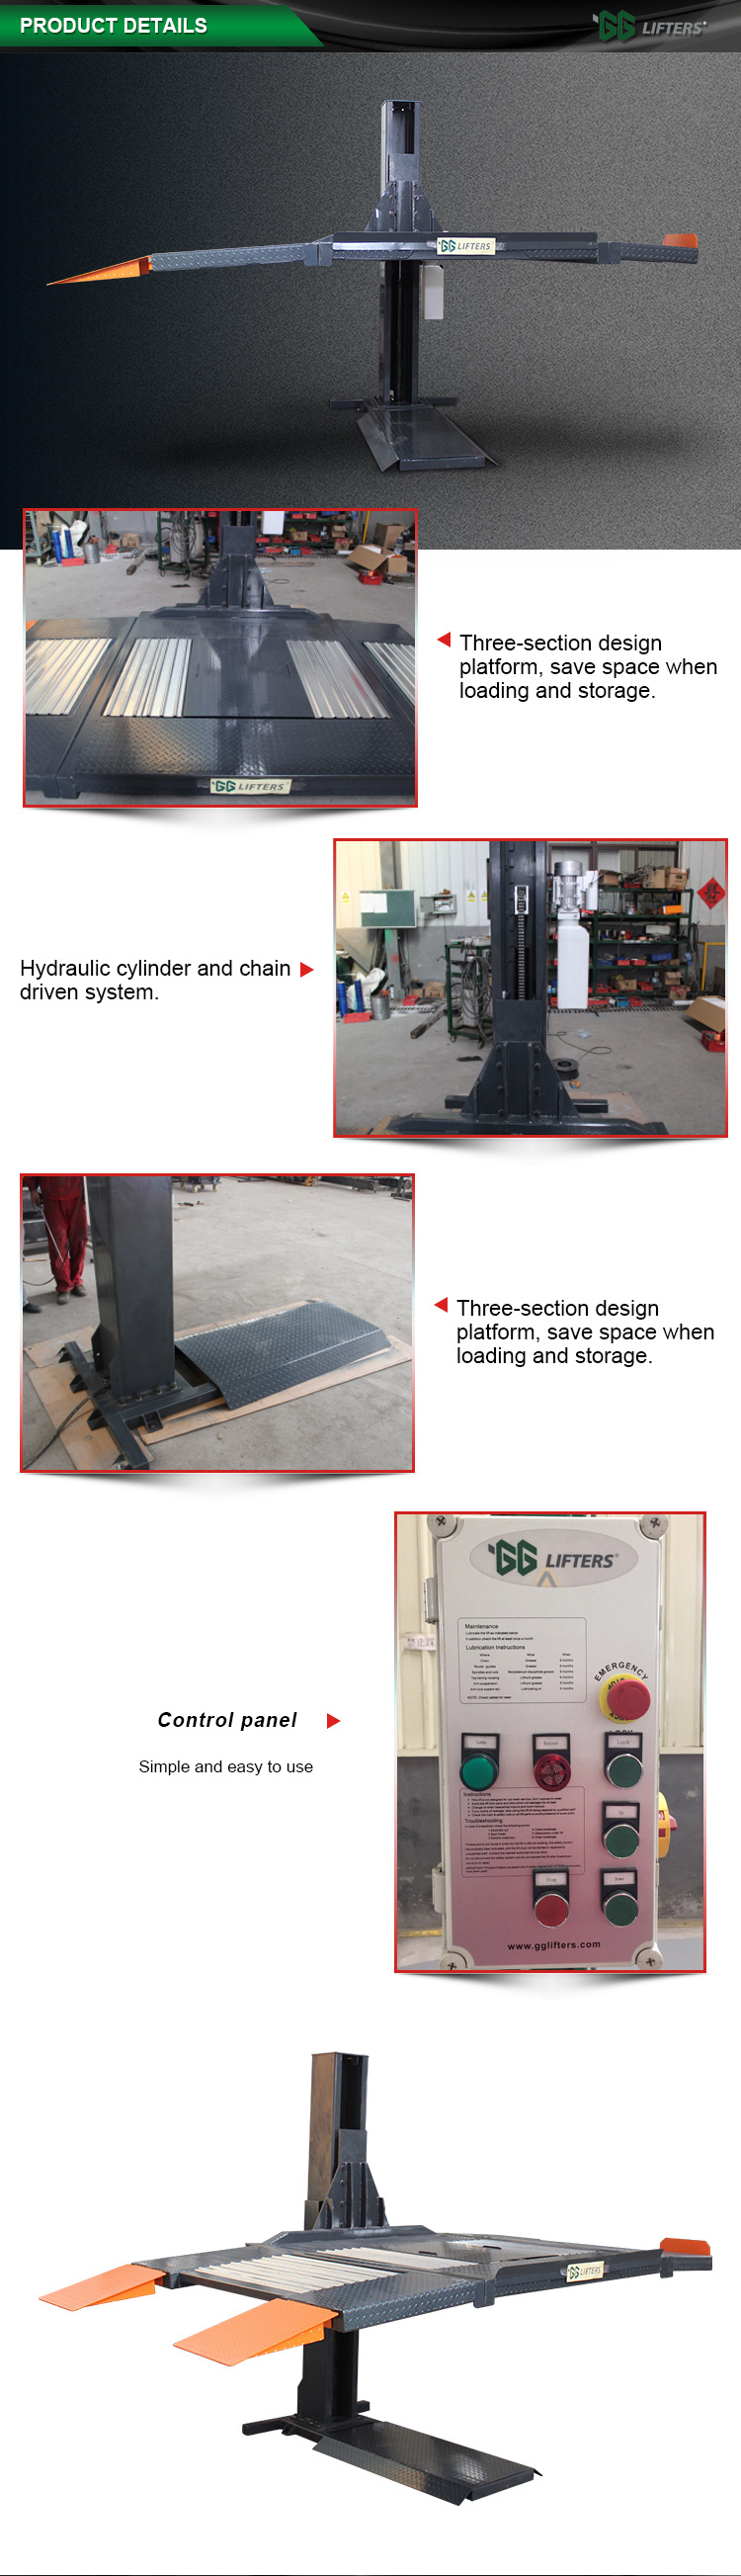 CE Approved GG Single Side Post Car Lifter for Vehicle Parking